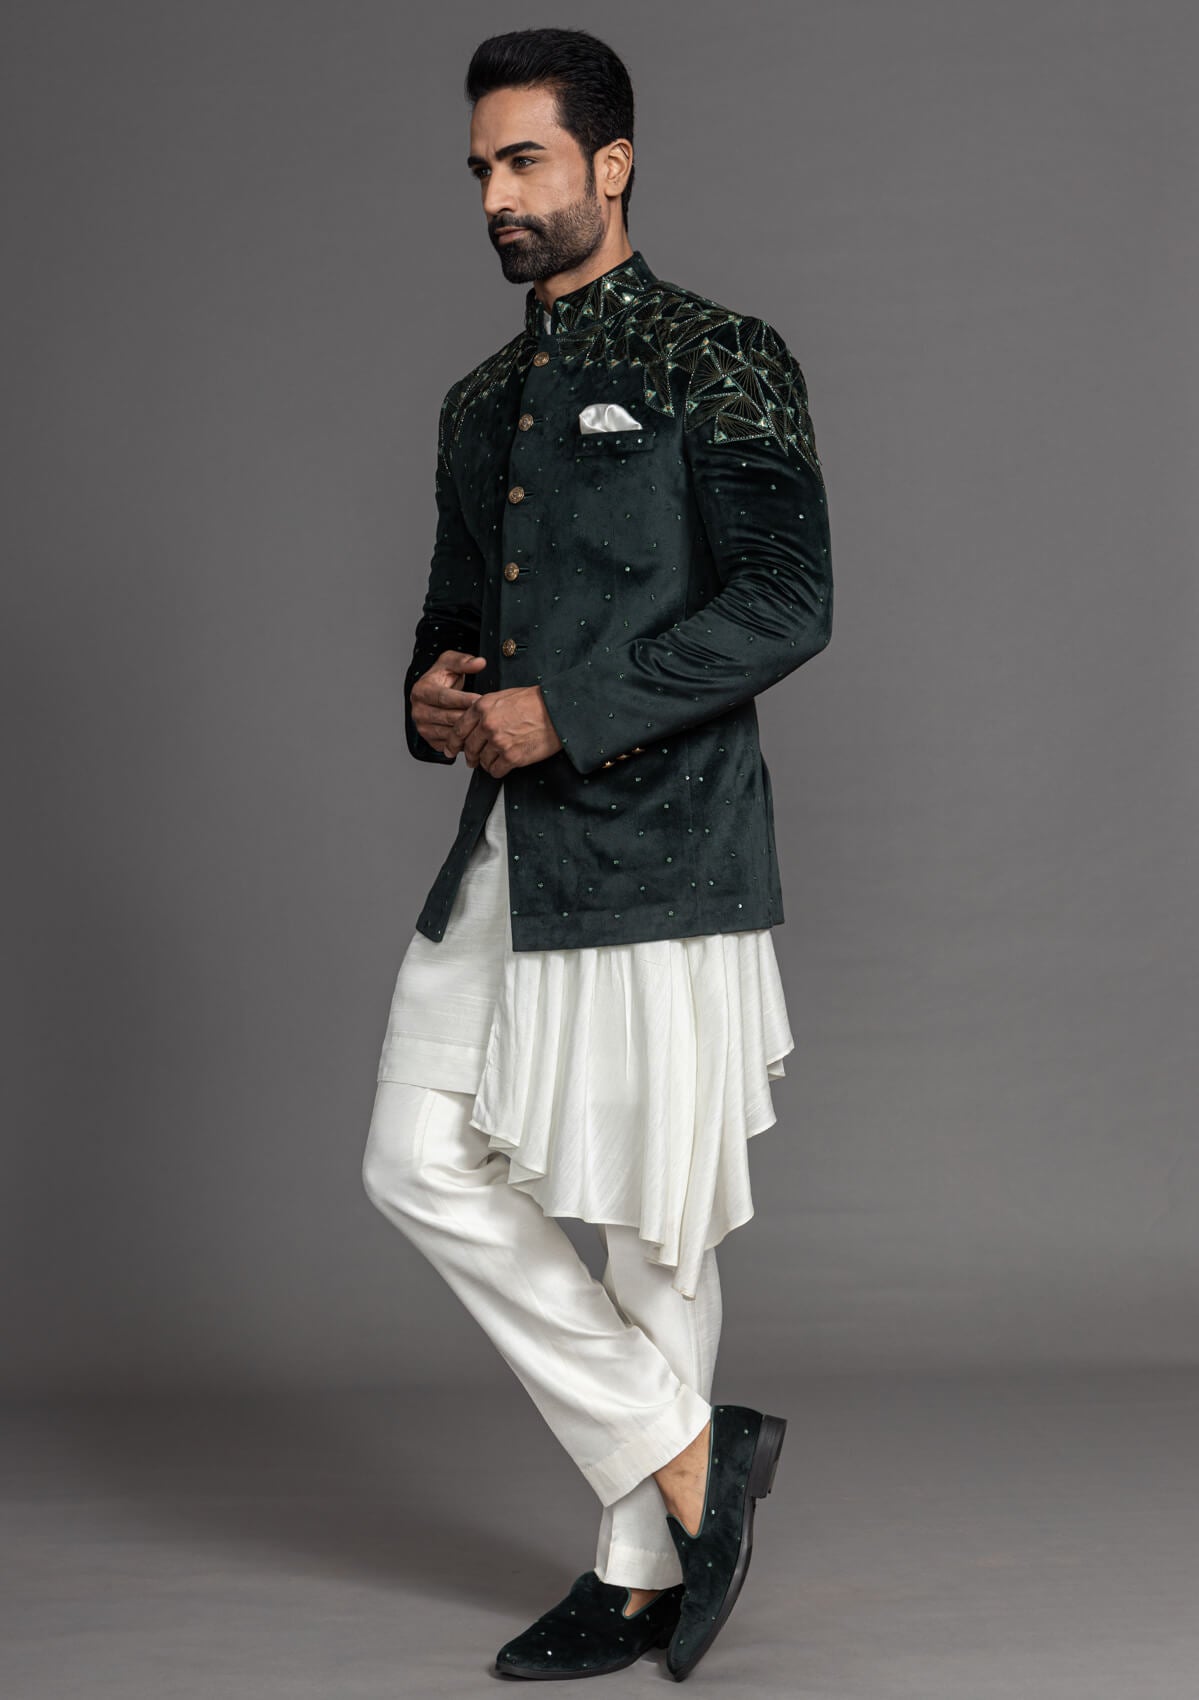 Elegant Bandhgala suit with a modern twist and intricate detailing